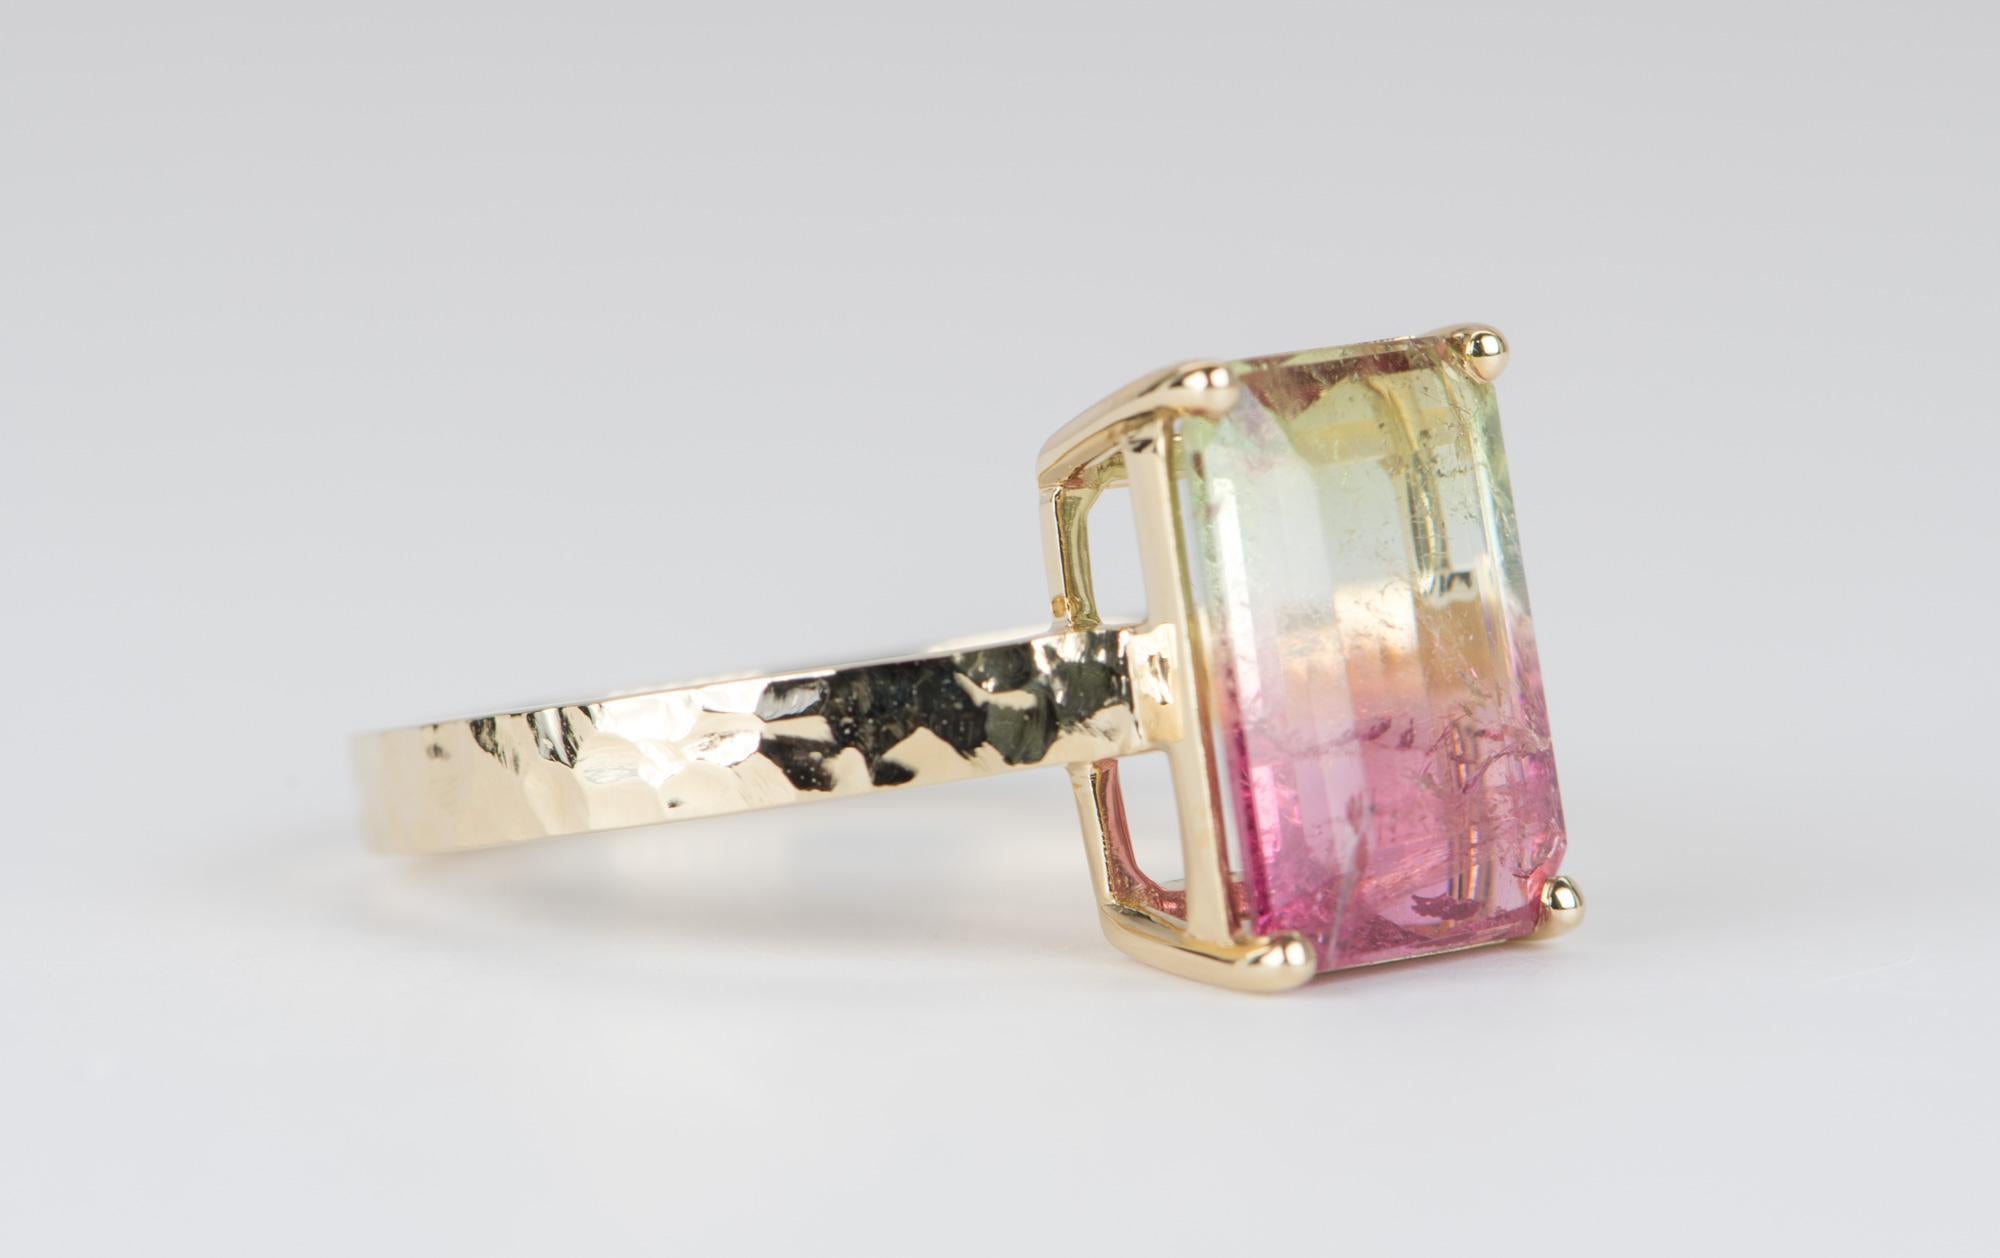 ♥  A solid 14K yellow gold ring set with a large bi-color watermelon tourmaline in the center, set on a hammered texture band
♥ This is a stunning statement ring! The tourmaline has a vibrant mix of pink, yellow, and green colors.
♥  The overall